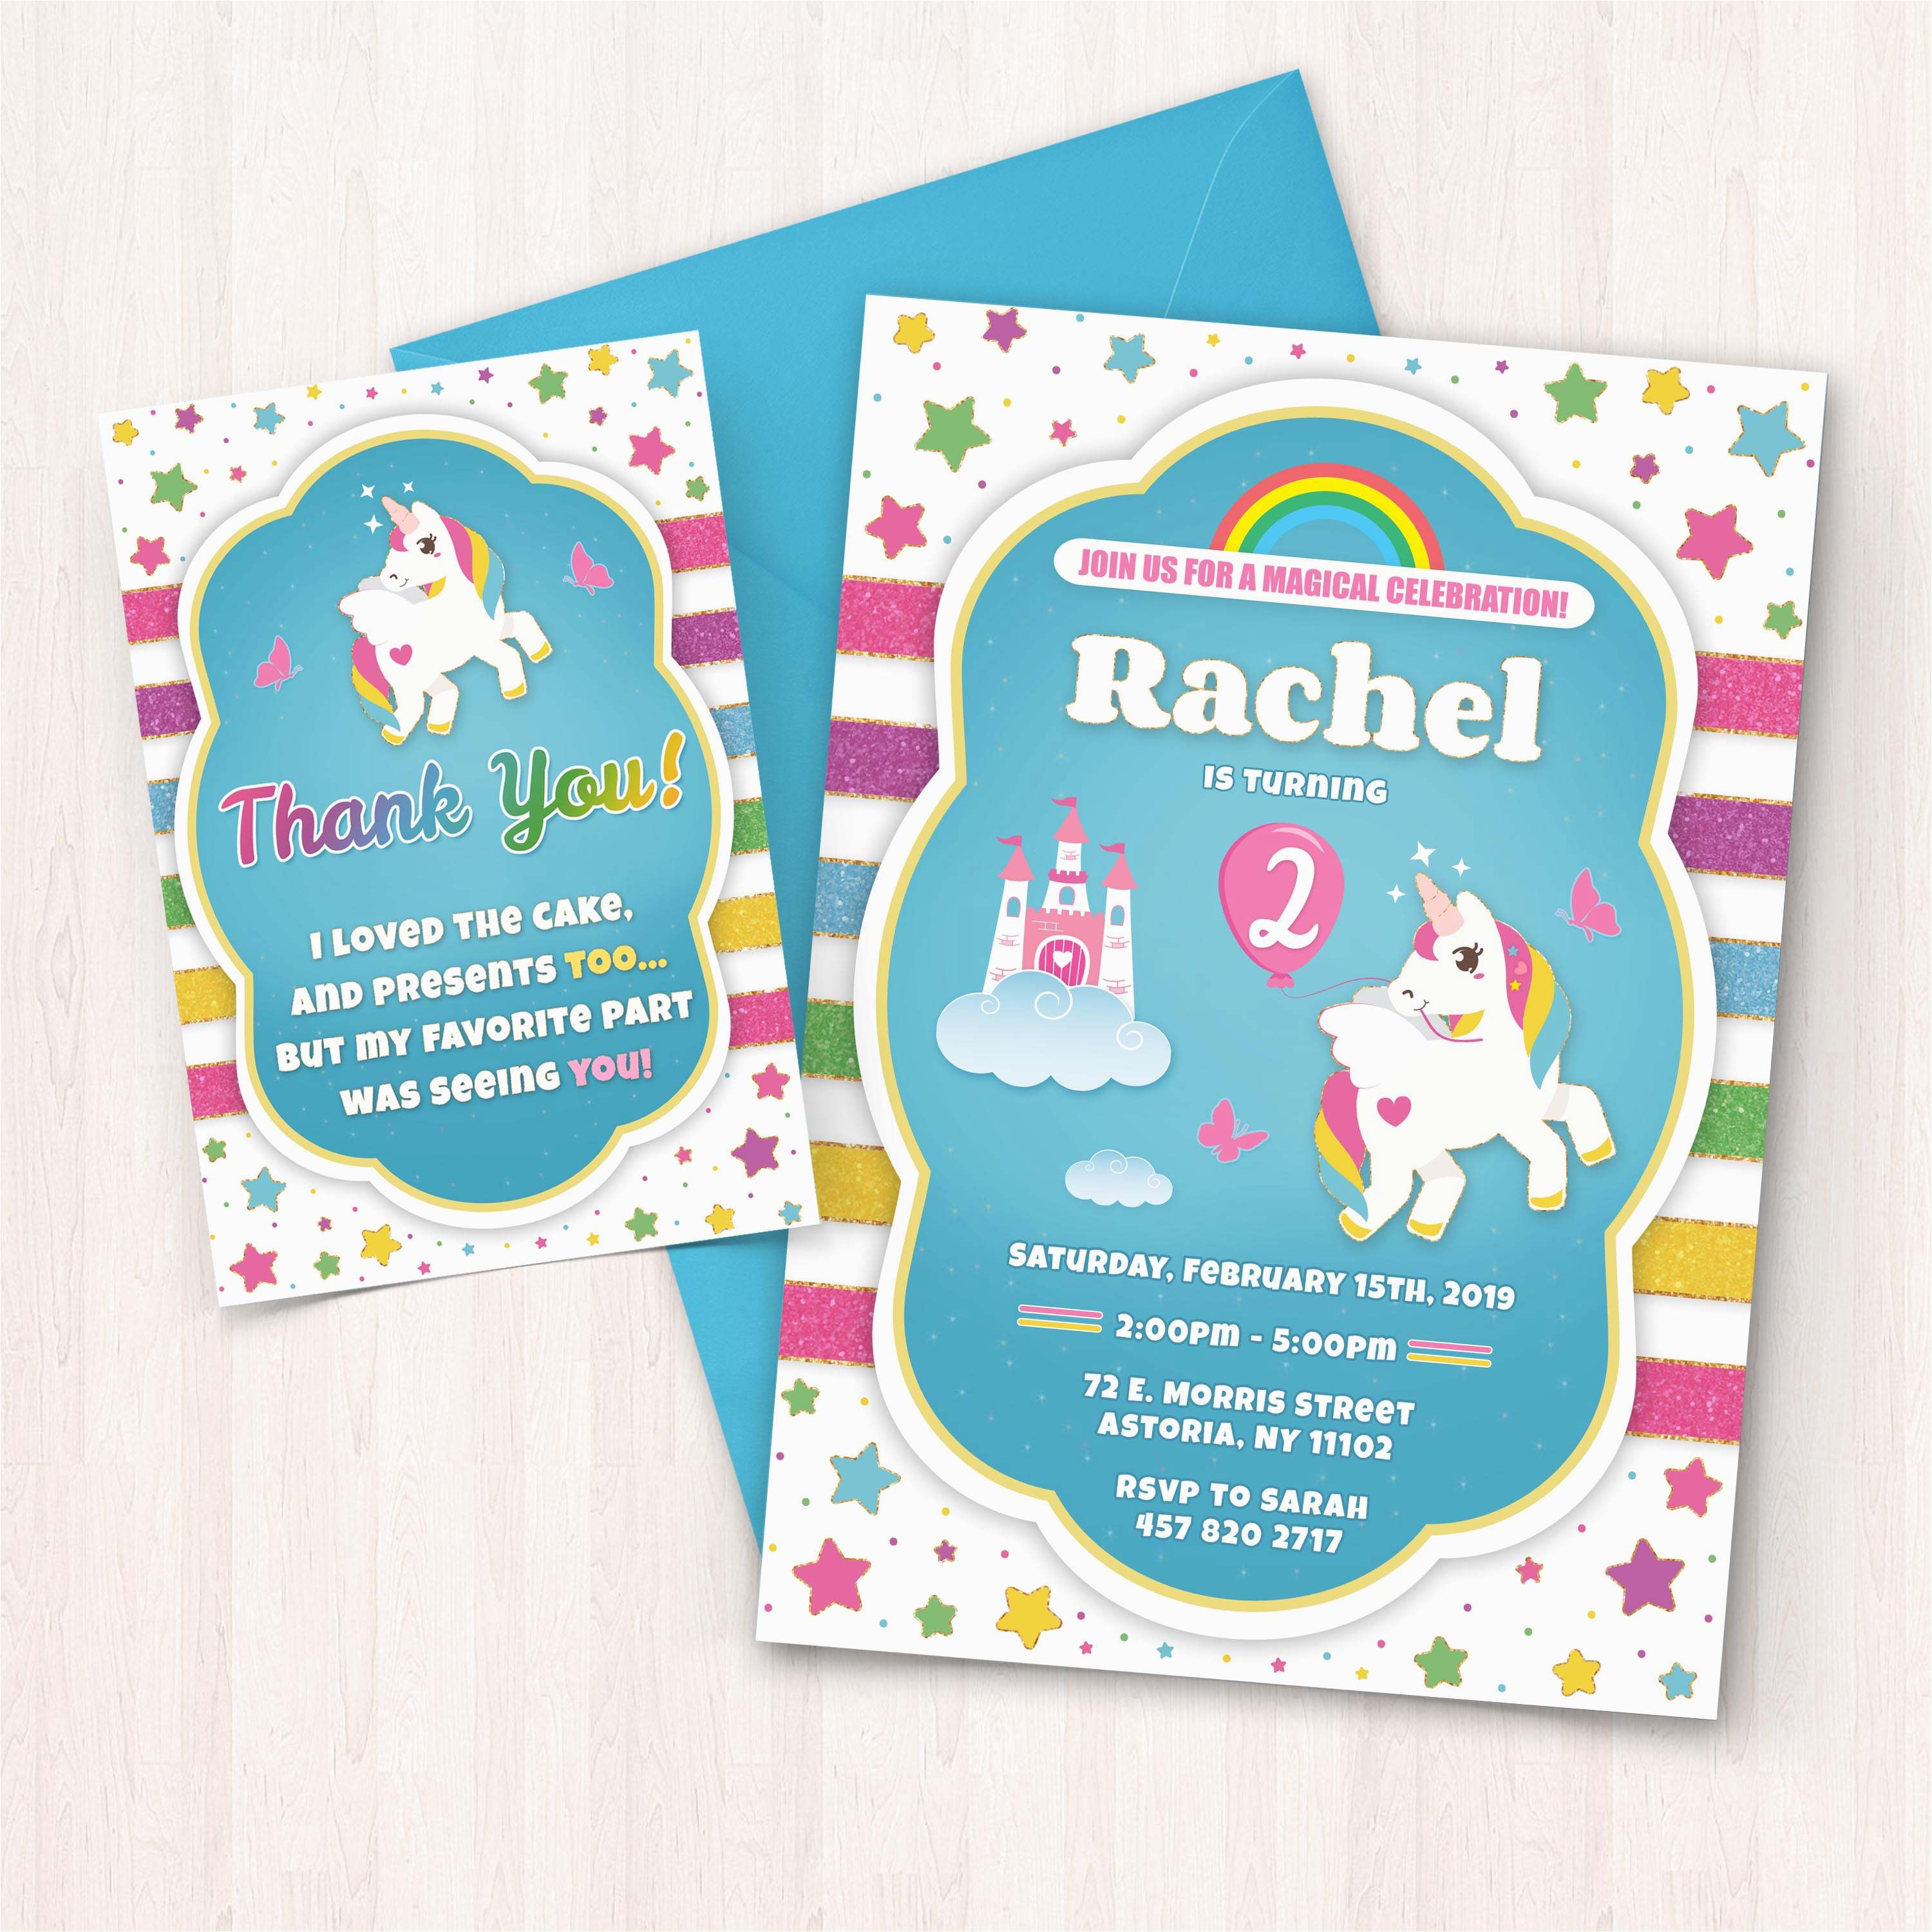 printable unicorn birthday invitations free thank you cards to print at home